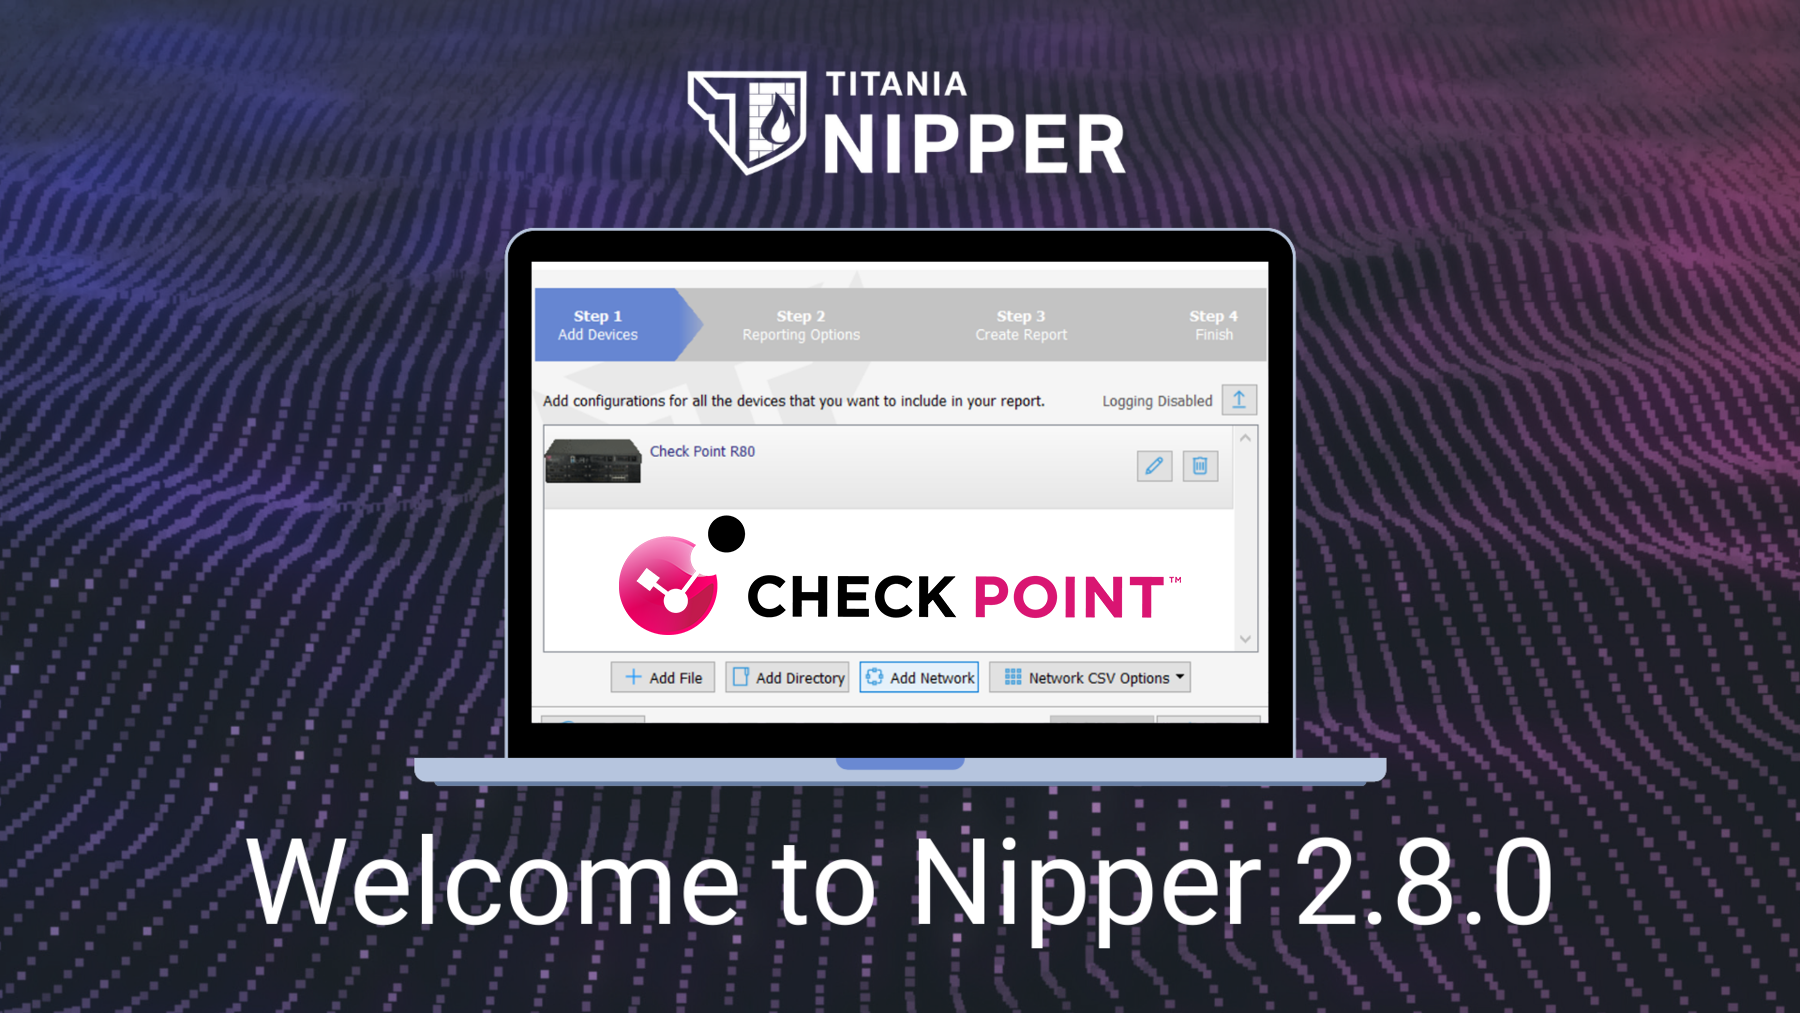 Download the latest update of Titania Nipper Version 2.8.0 with Check Point Auditing